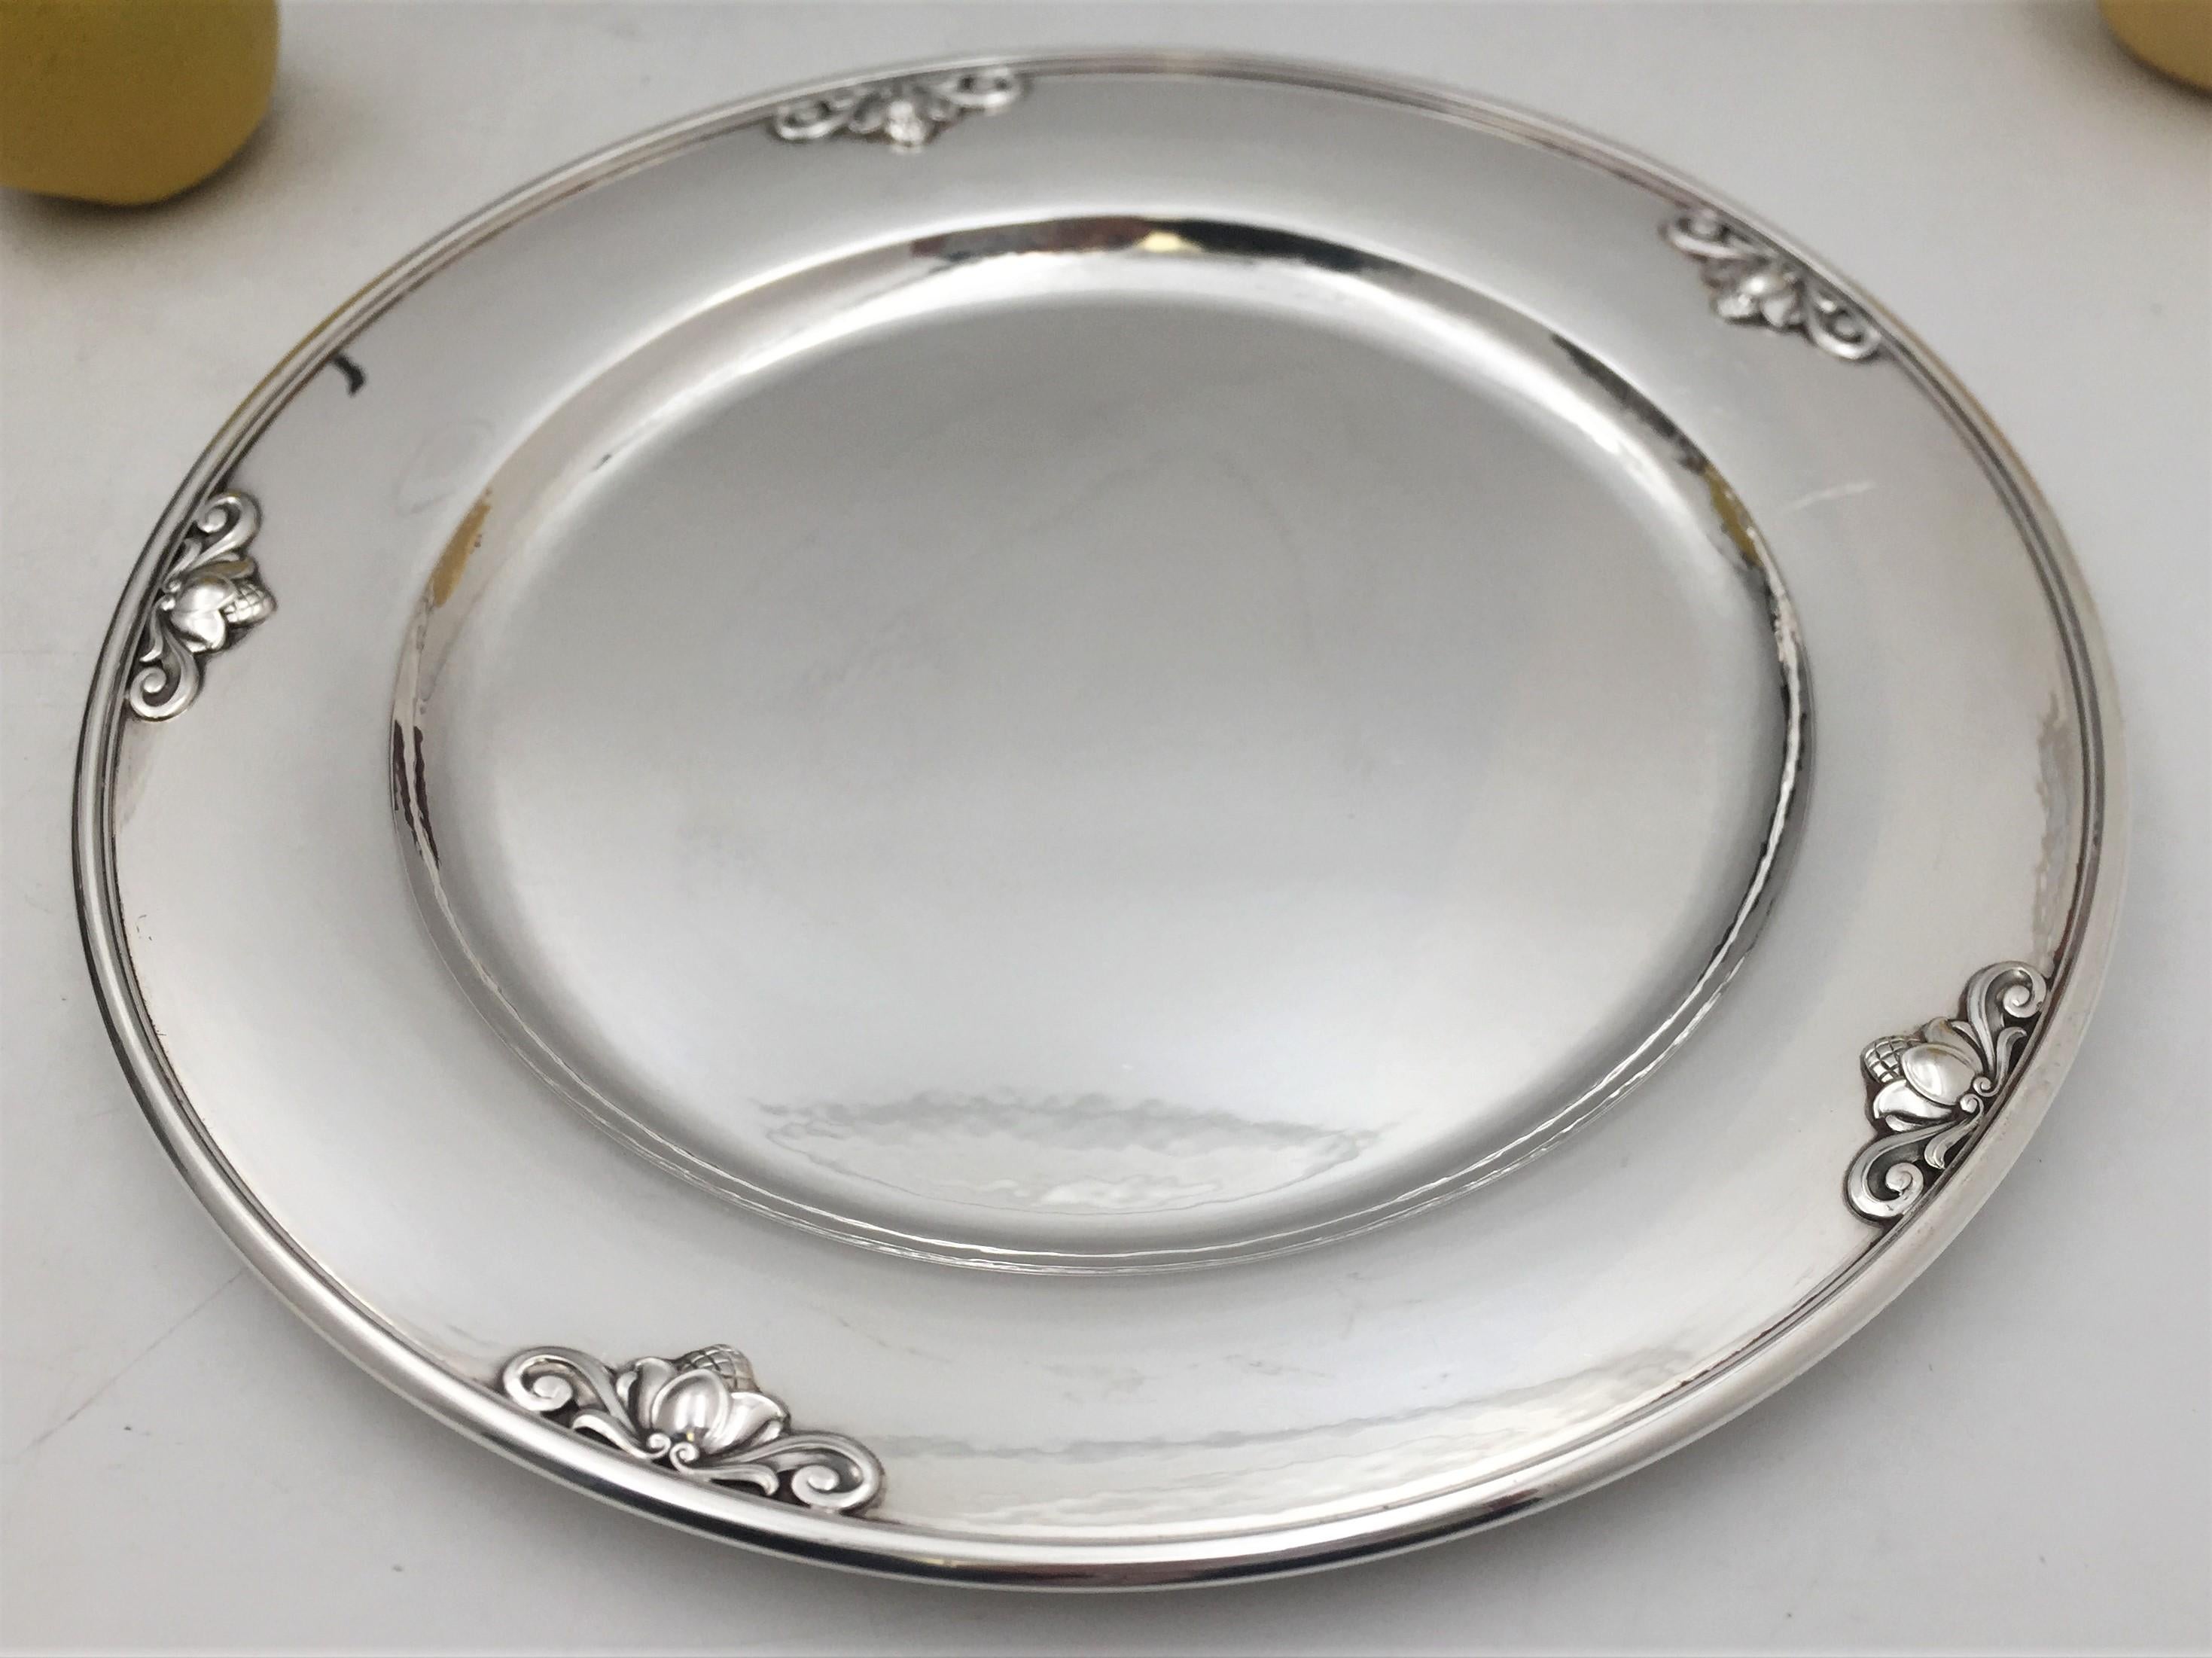 Georg Jensen by J. Rohde sterling silver charger/ dinner plate in celebrated Acorn pattern number 642A. It measures 11'' in diameter by 3/4'', weighs 22.2 troy ounces, and bears hallmarks as shown. 

Johan Rohde hailed from a wealthy family and